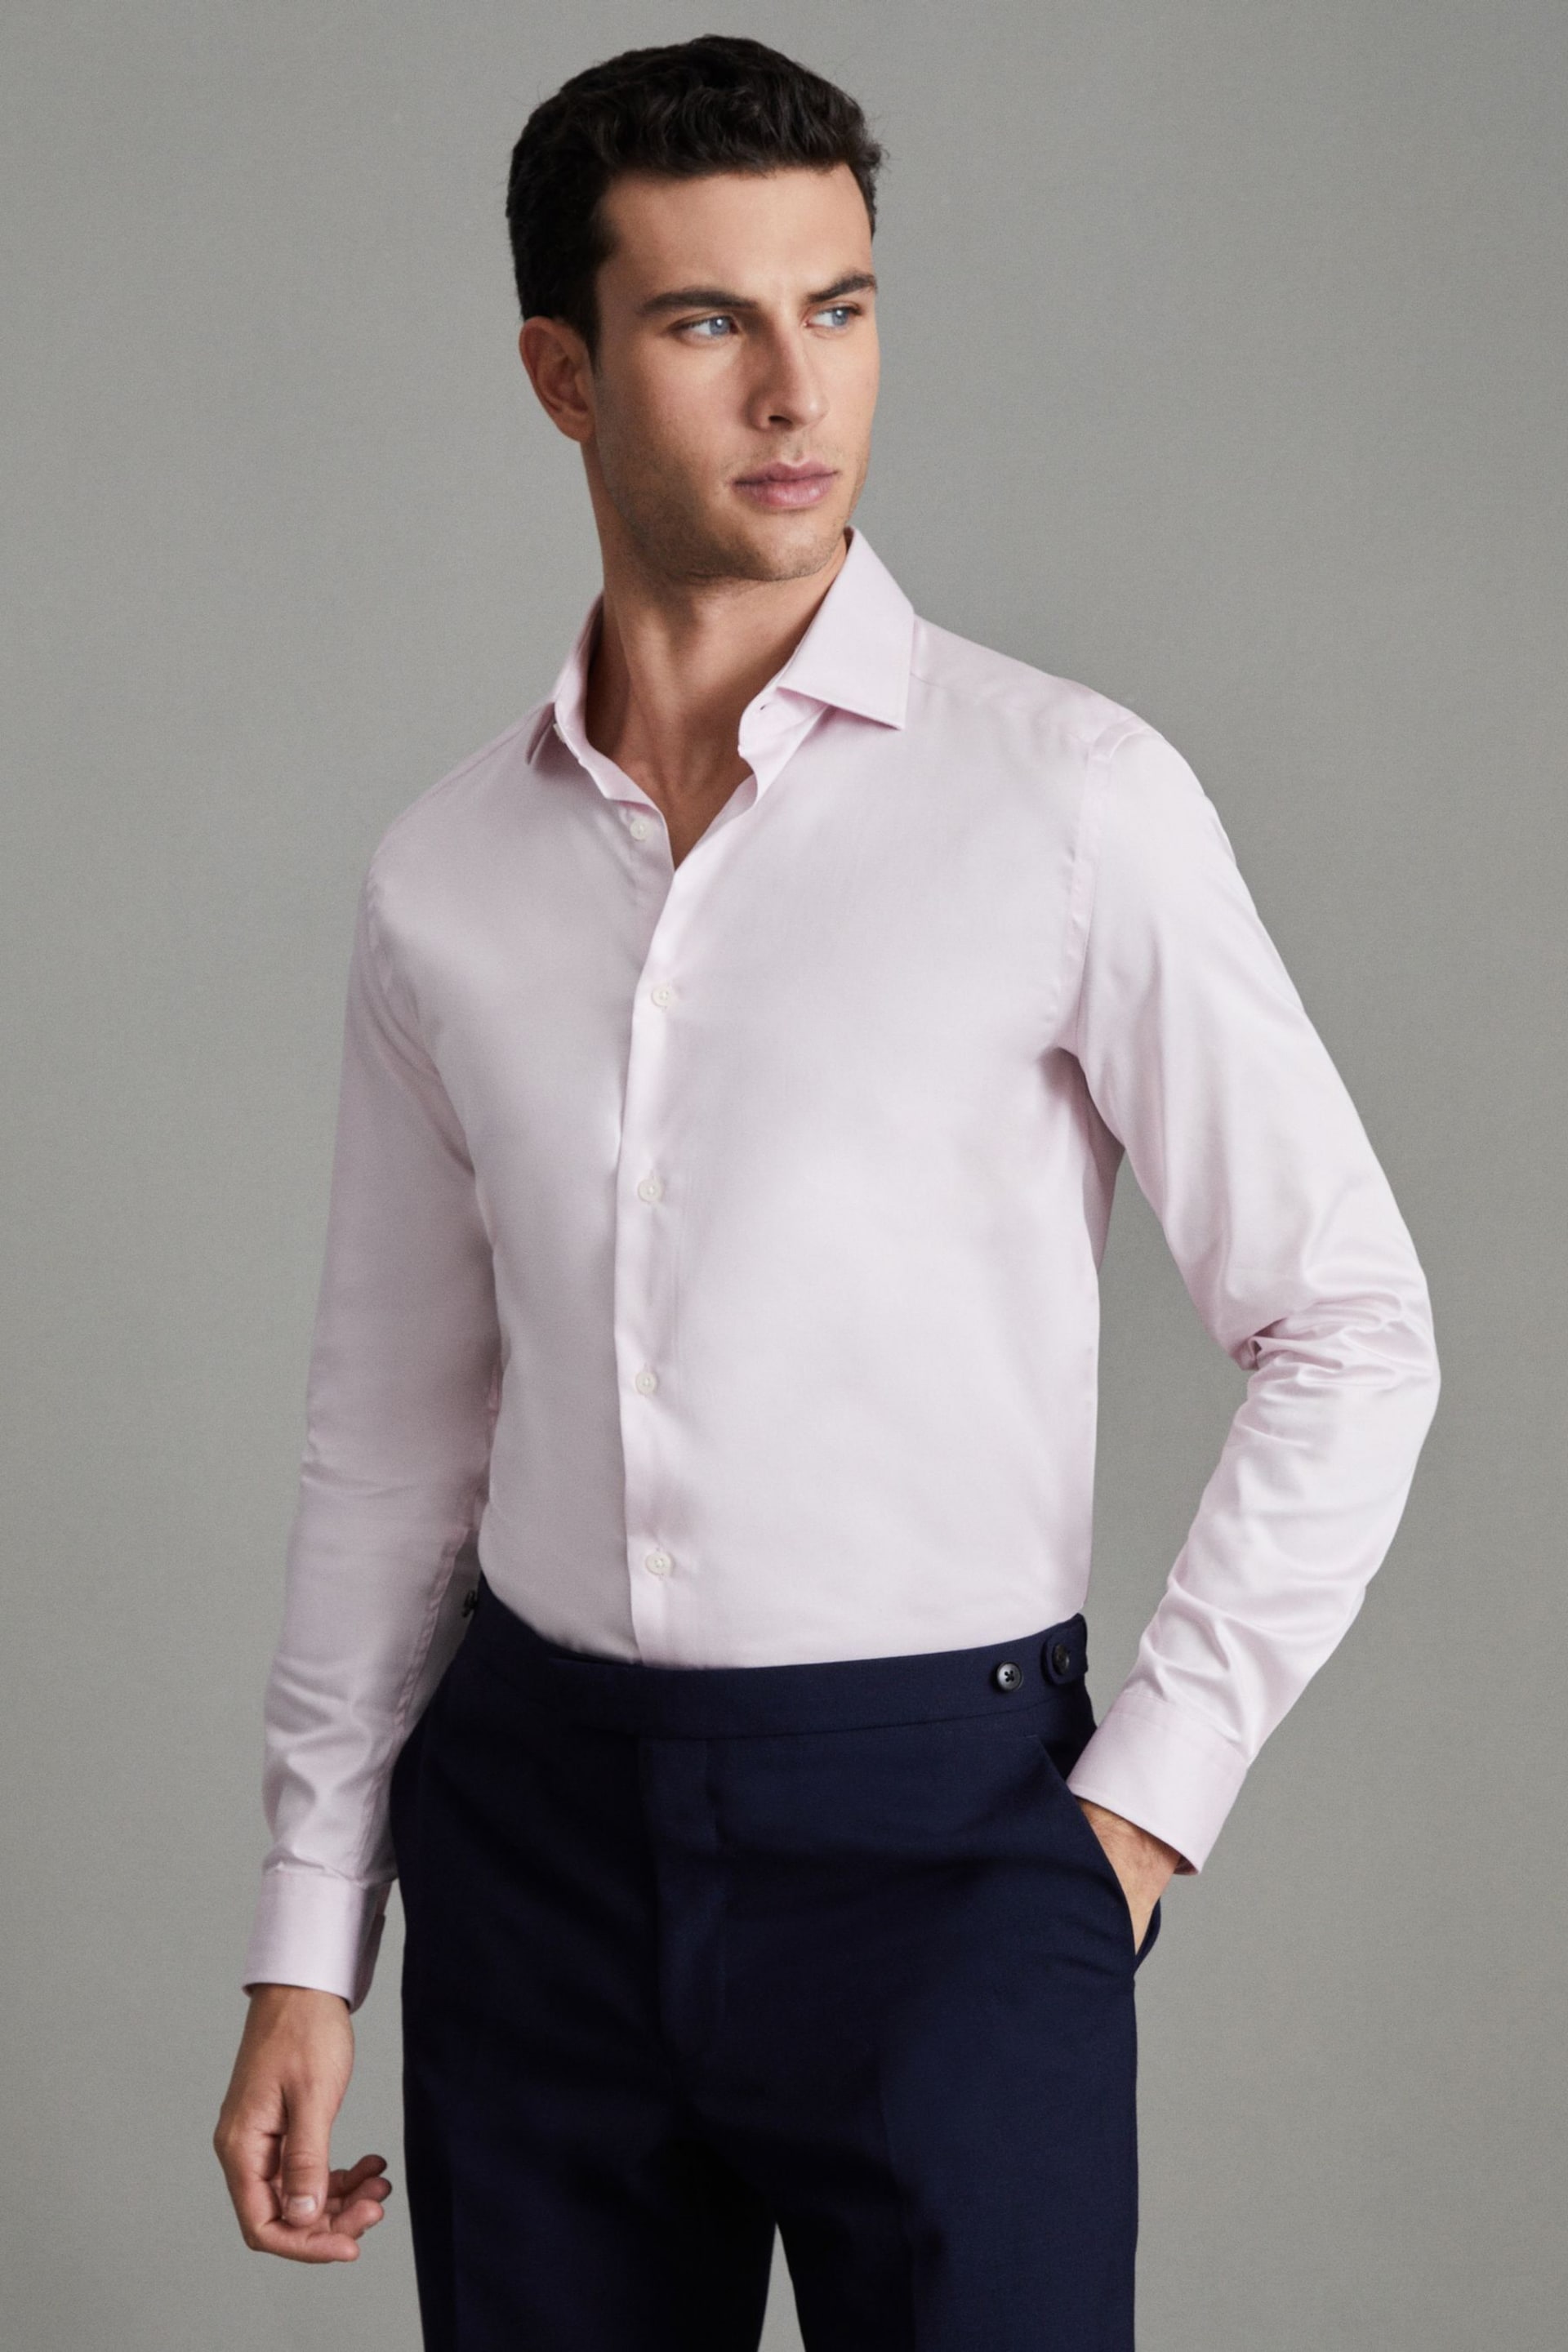 Reiss Pink Remote Slim Fit Cotton Sateen Shirt - Image 1 of 6